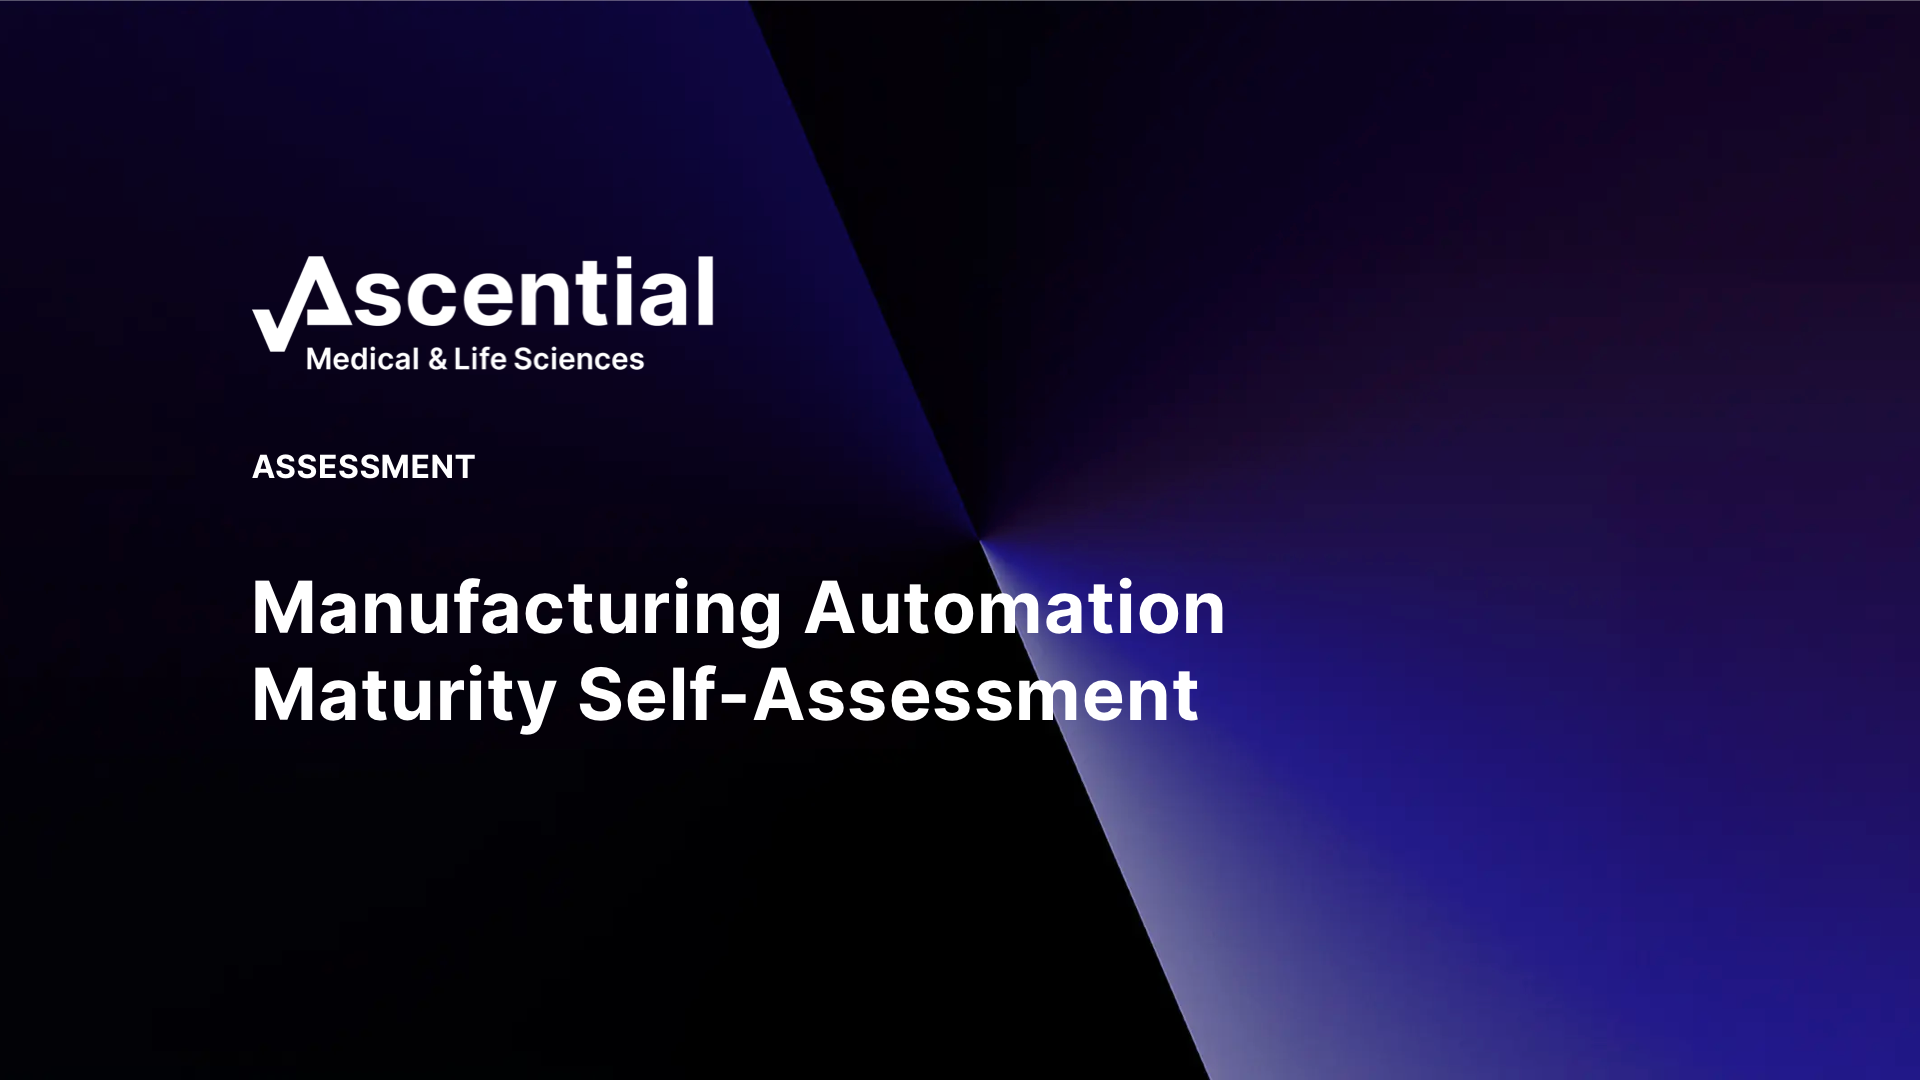 Manufacturing Automation Maturity Self-Assessment